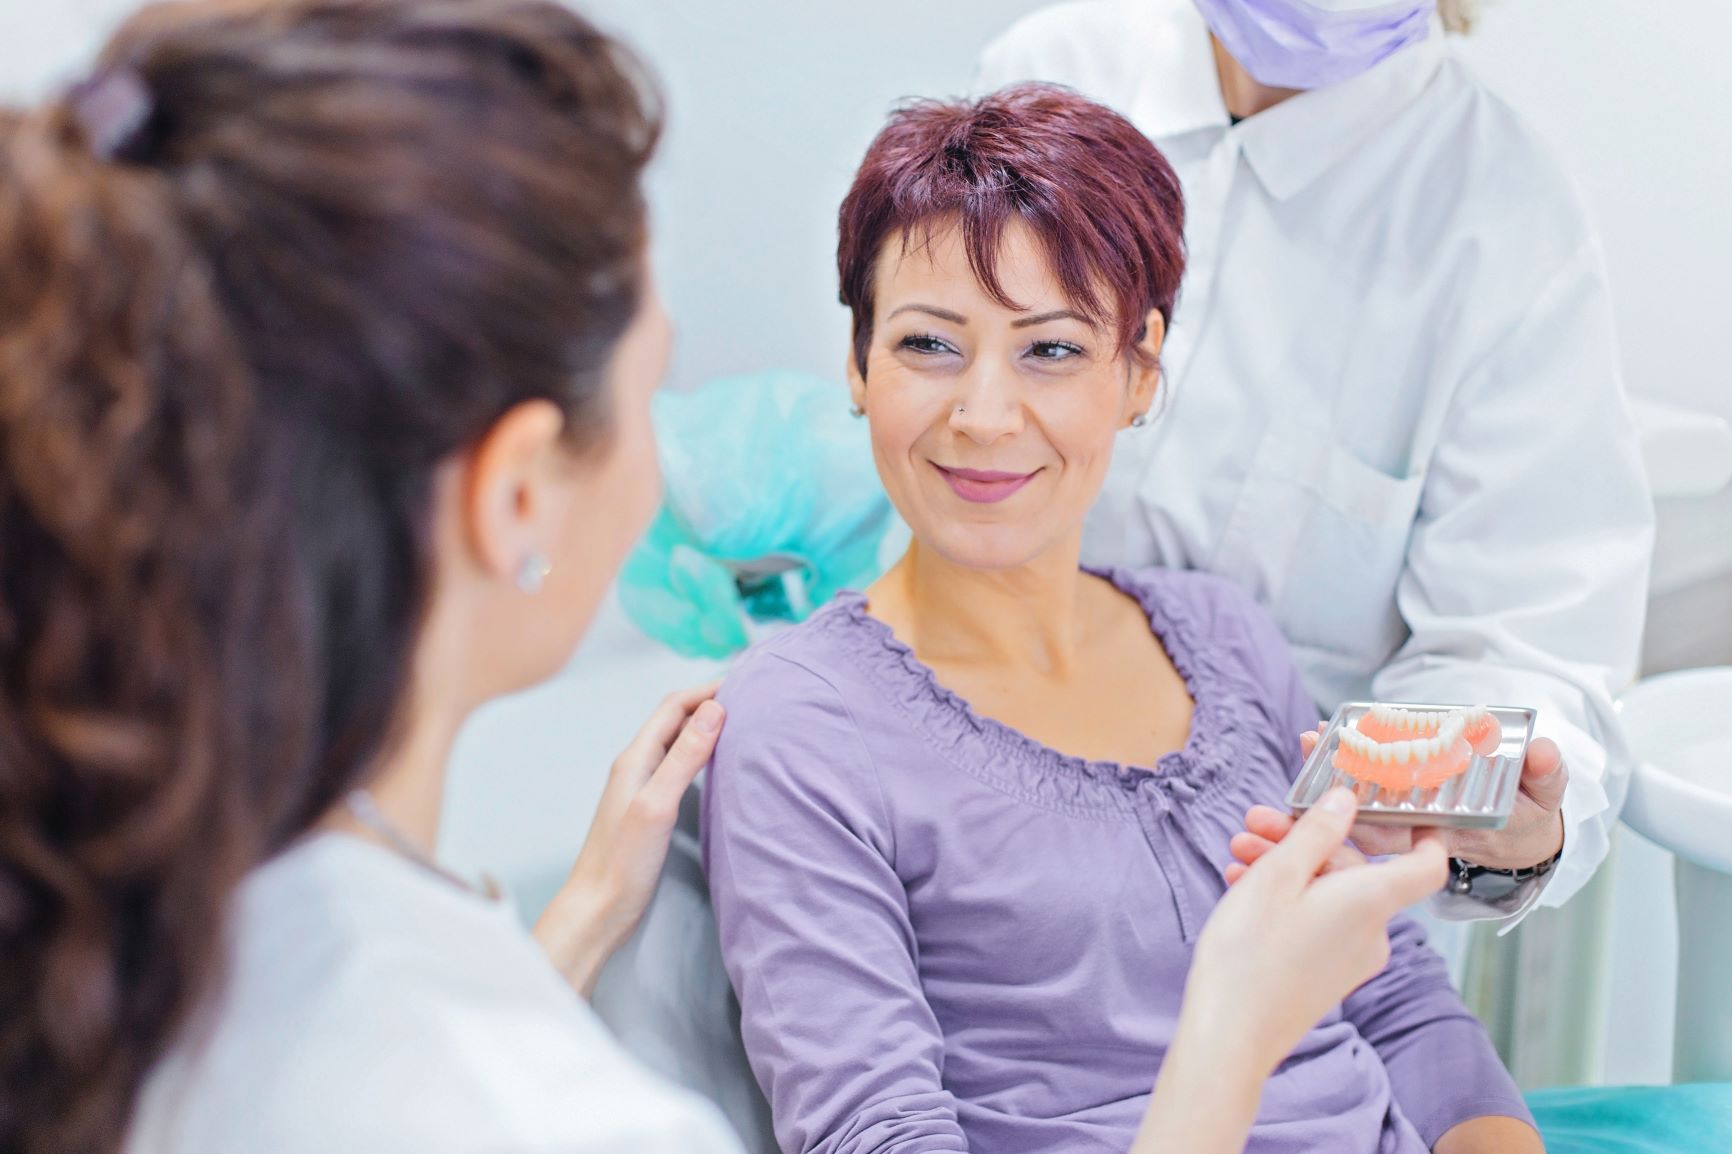 What is a bone graft in relation to a dental implant? That's a question we hear often at Fisher Pointe Dental. A bone graft is used to repair structure of your jawbone and gums after tooth loss.